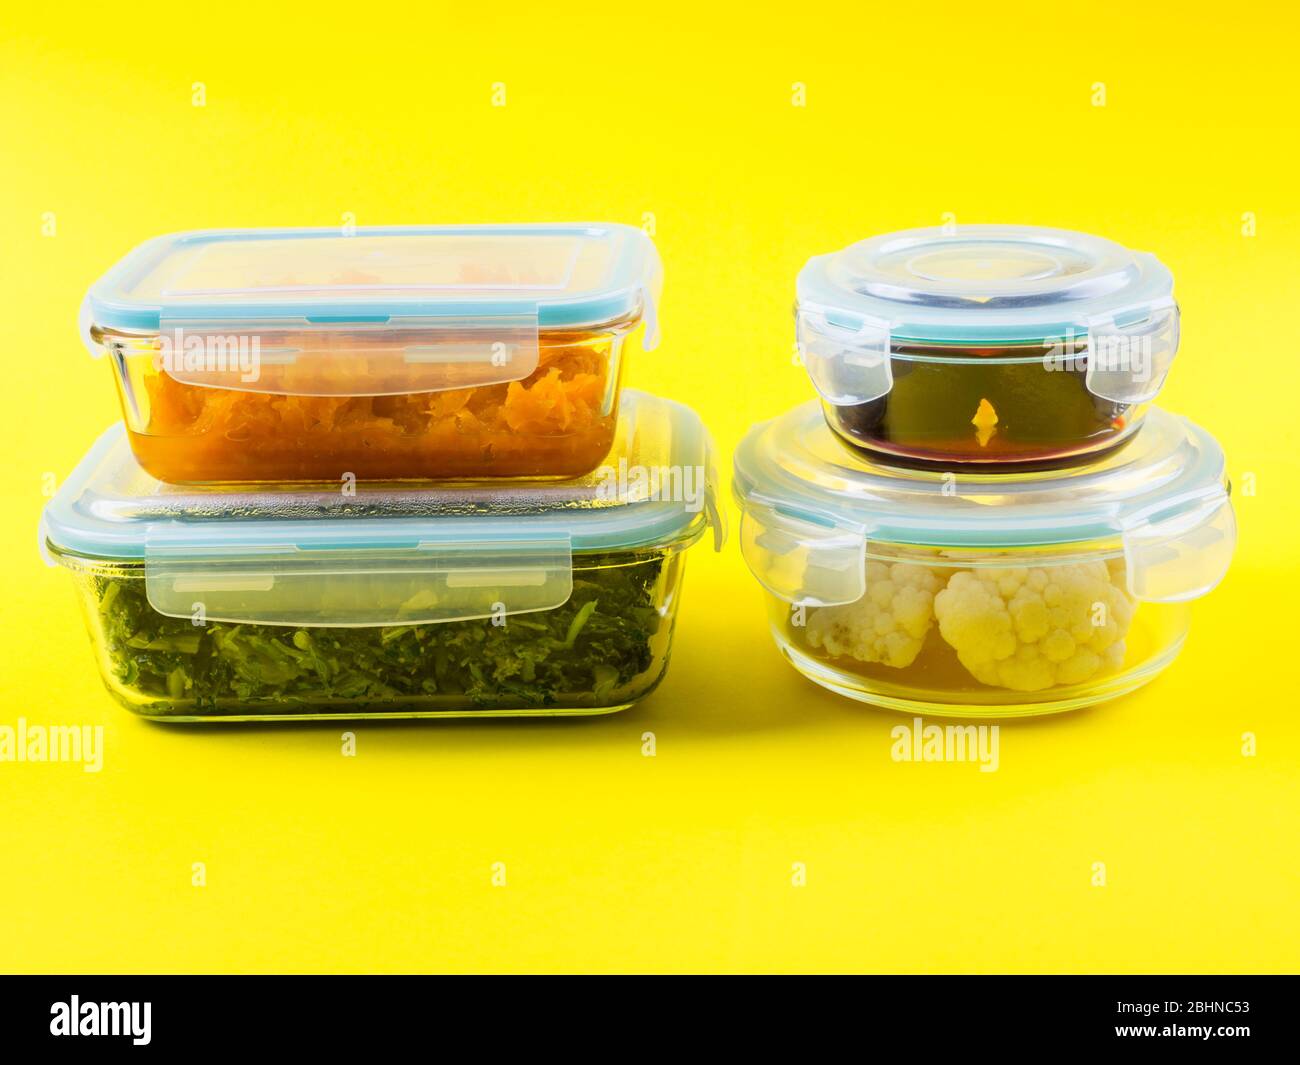 https://c8.alamy.com/comp/2BHNC53/stack-of-airtight-glass-containers-with-cooked-food-2BHNC53.jpg